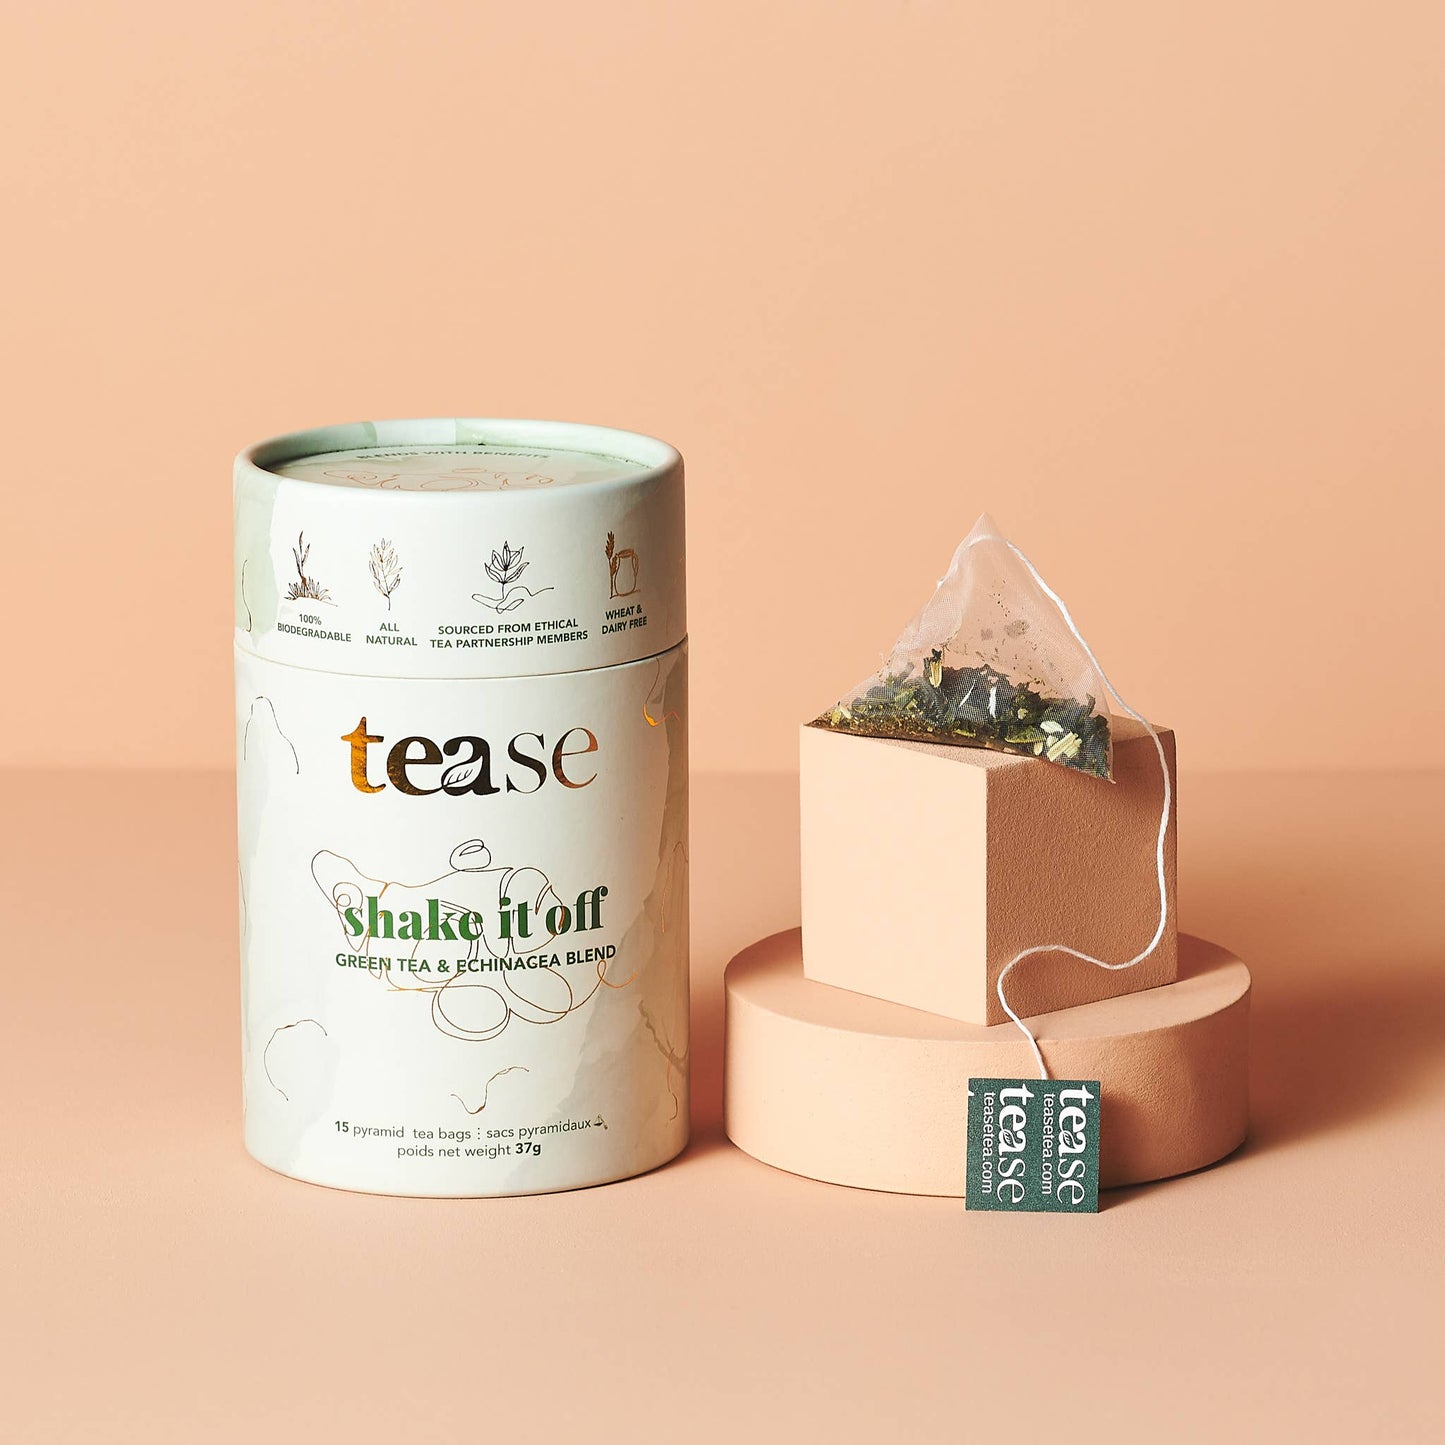 Tease - Shake It Off | All Natural Organic Tea Blend with Echinacea